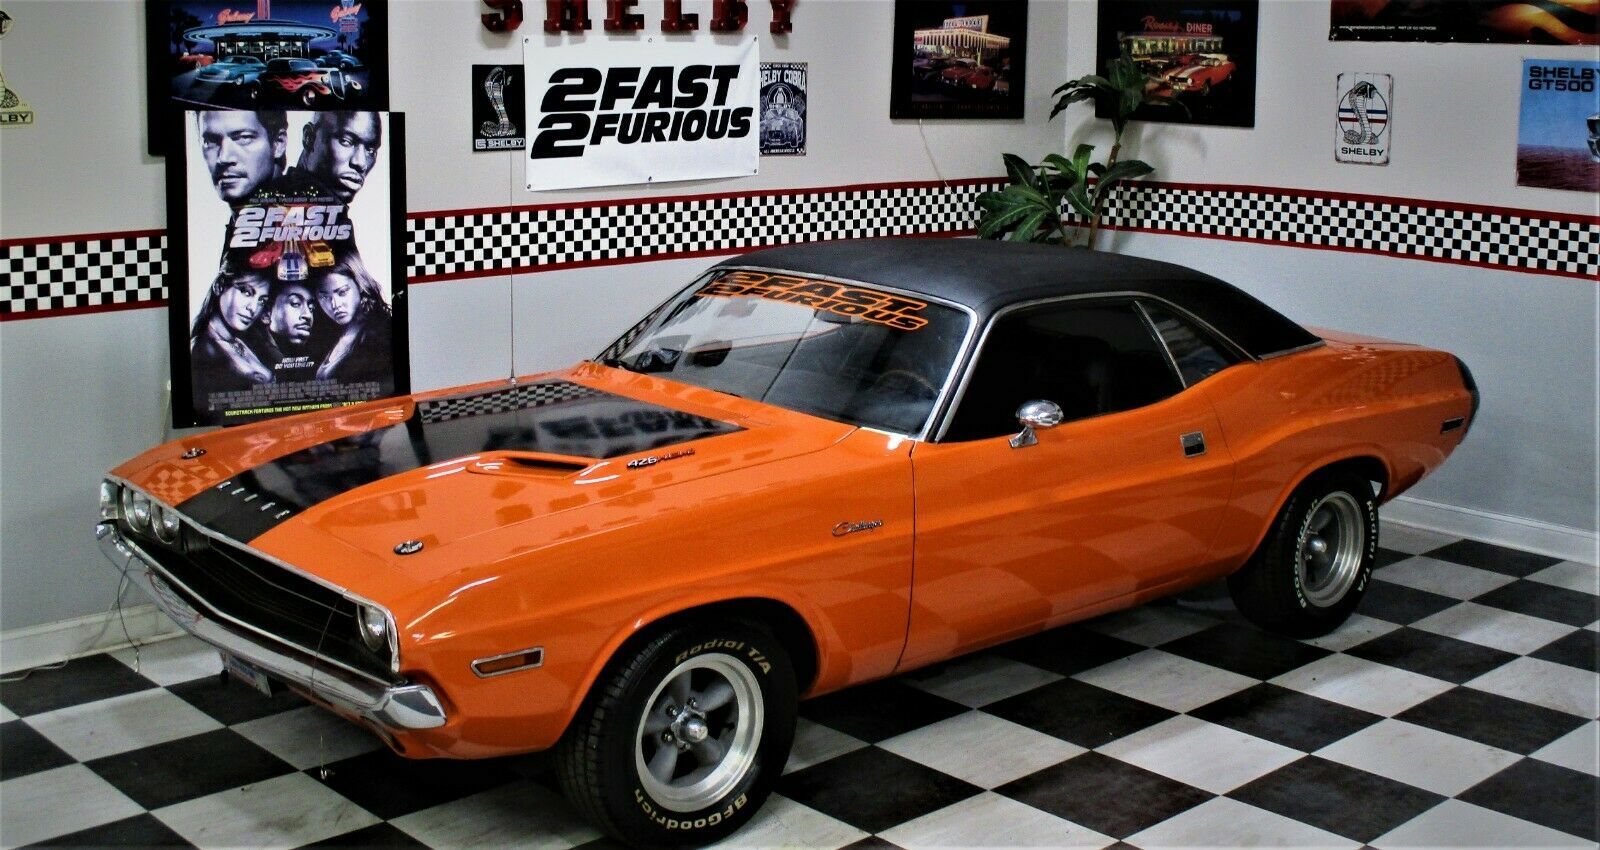 Dodge Challenger 1970 fast Furious